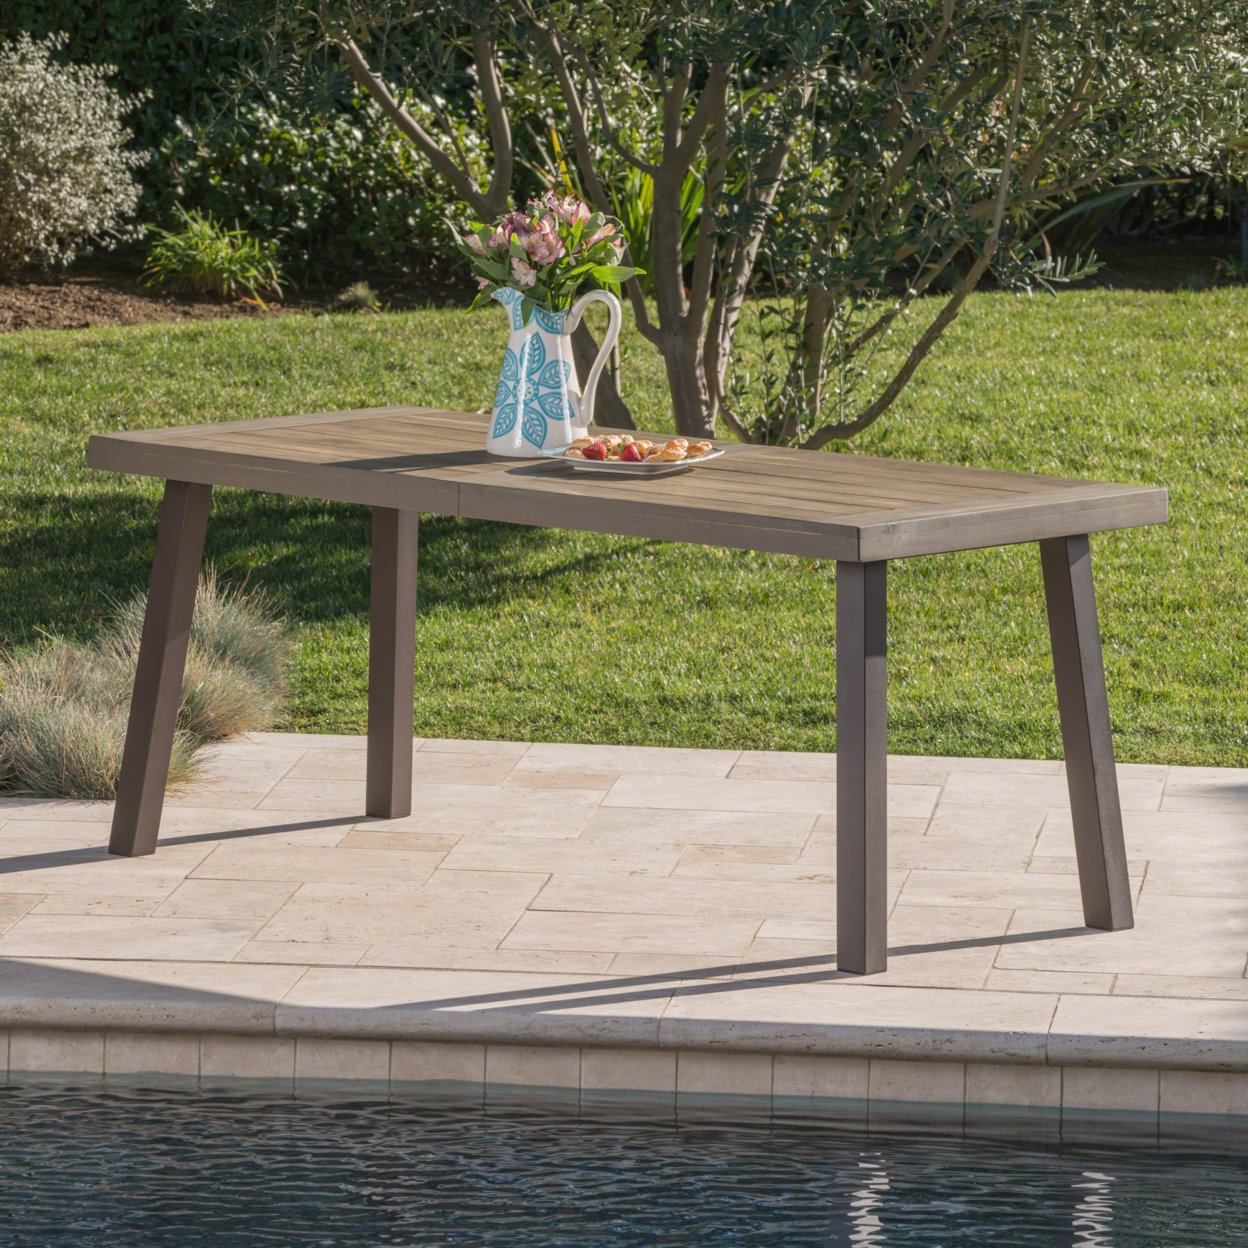 Mika Outdoor Finished Acacia Wood Dining Table With Metal Legs - Dark Brown/White